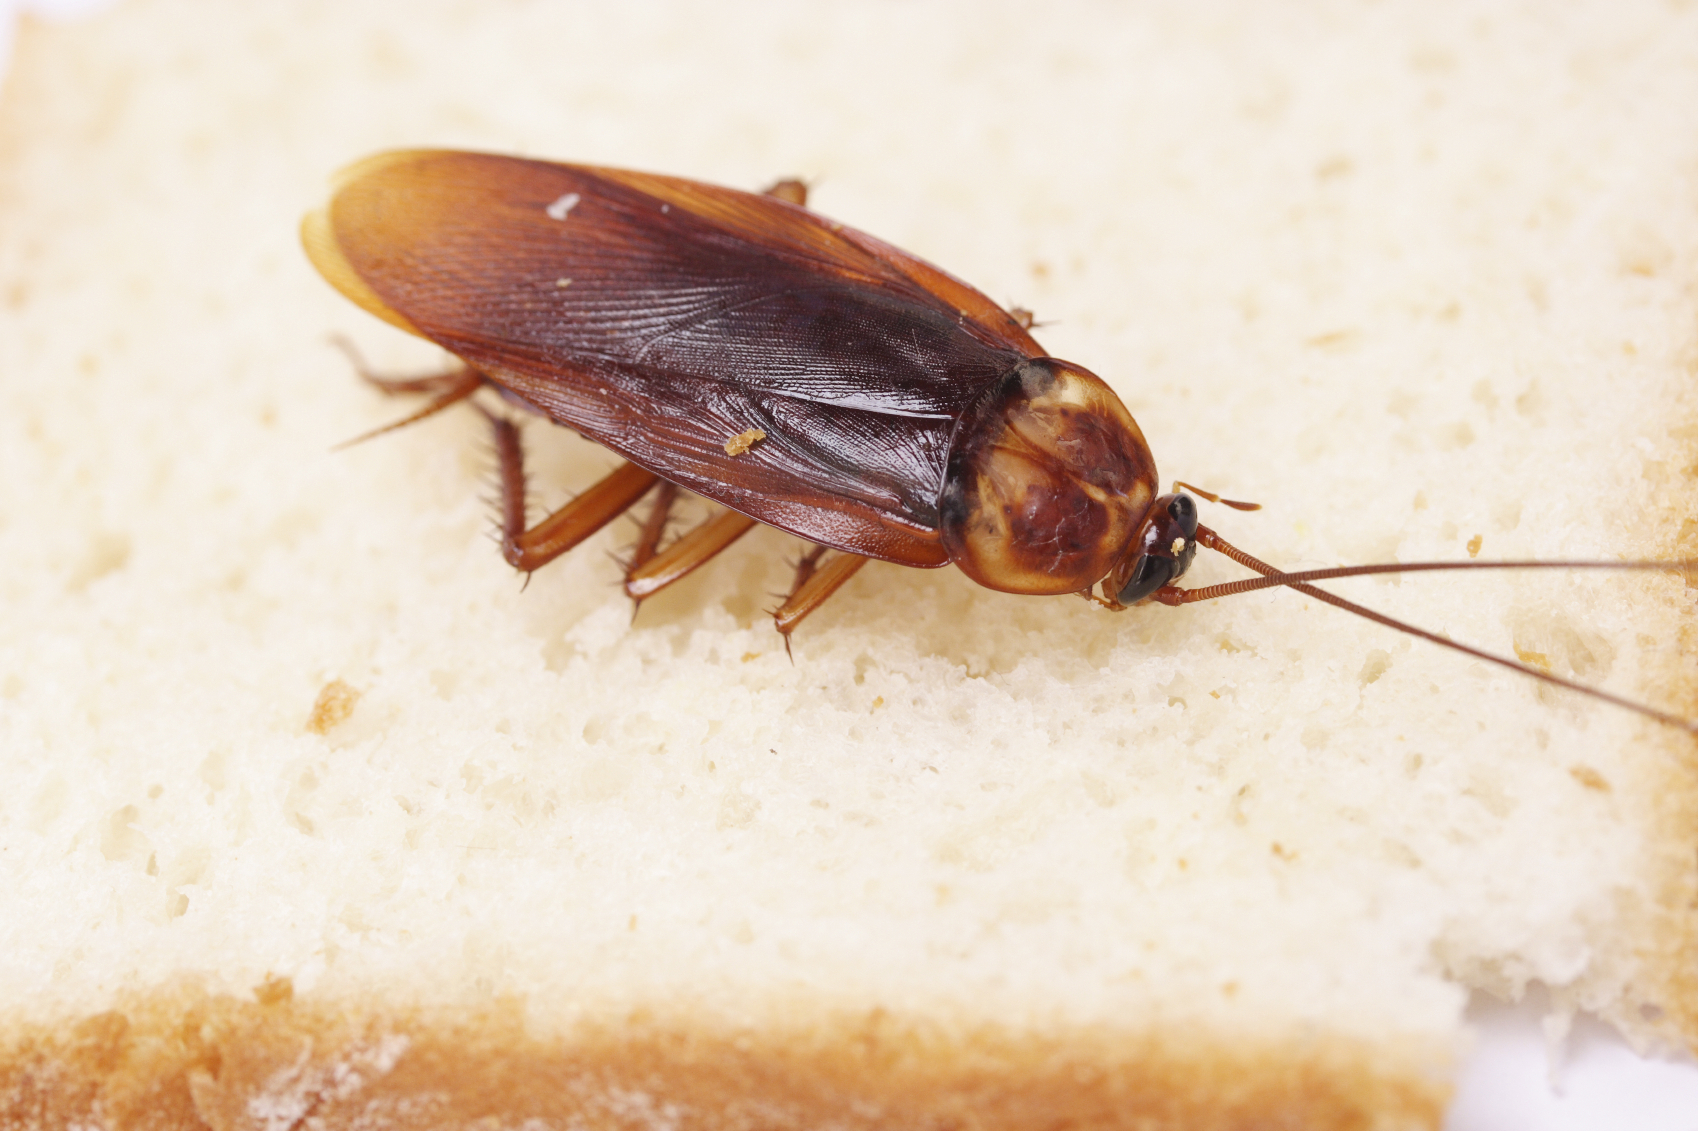 A cockroach and the type of diseases they can spread